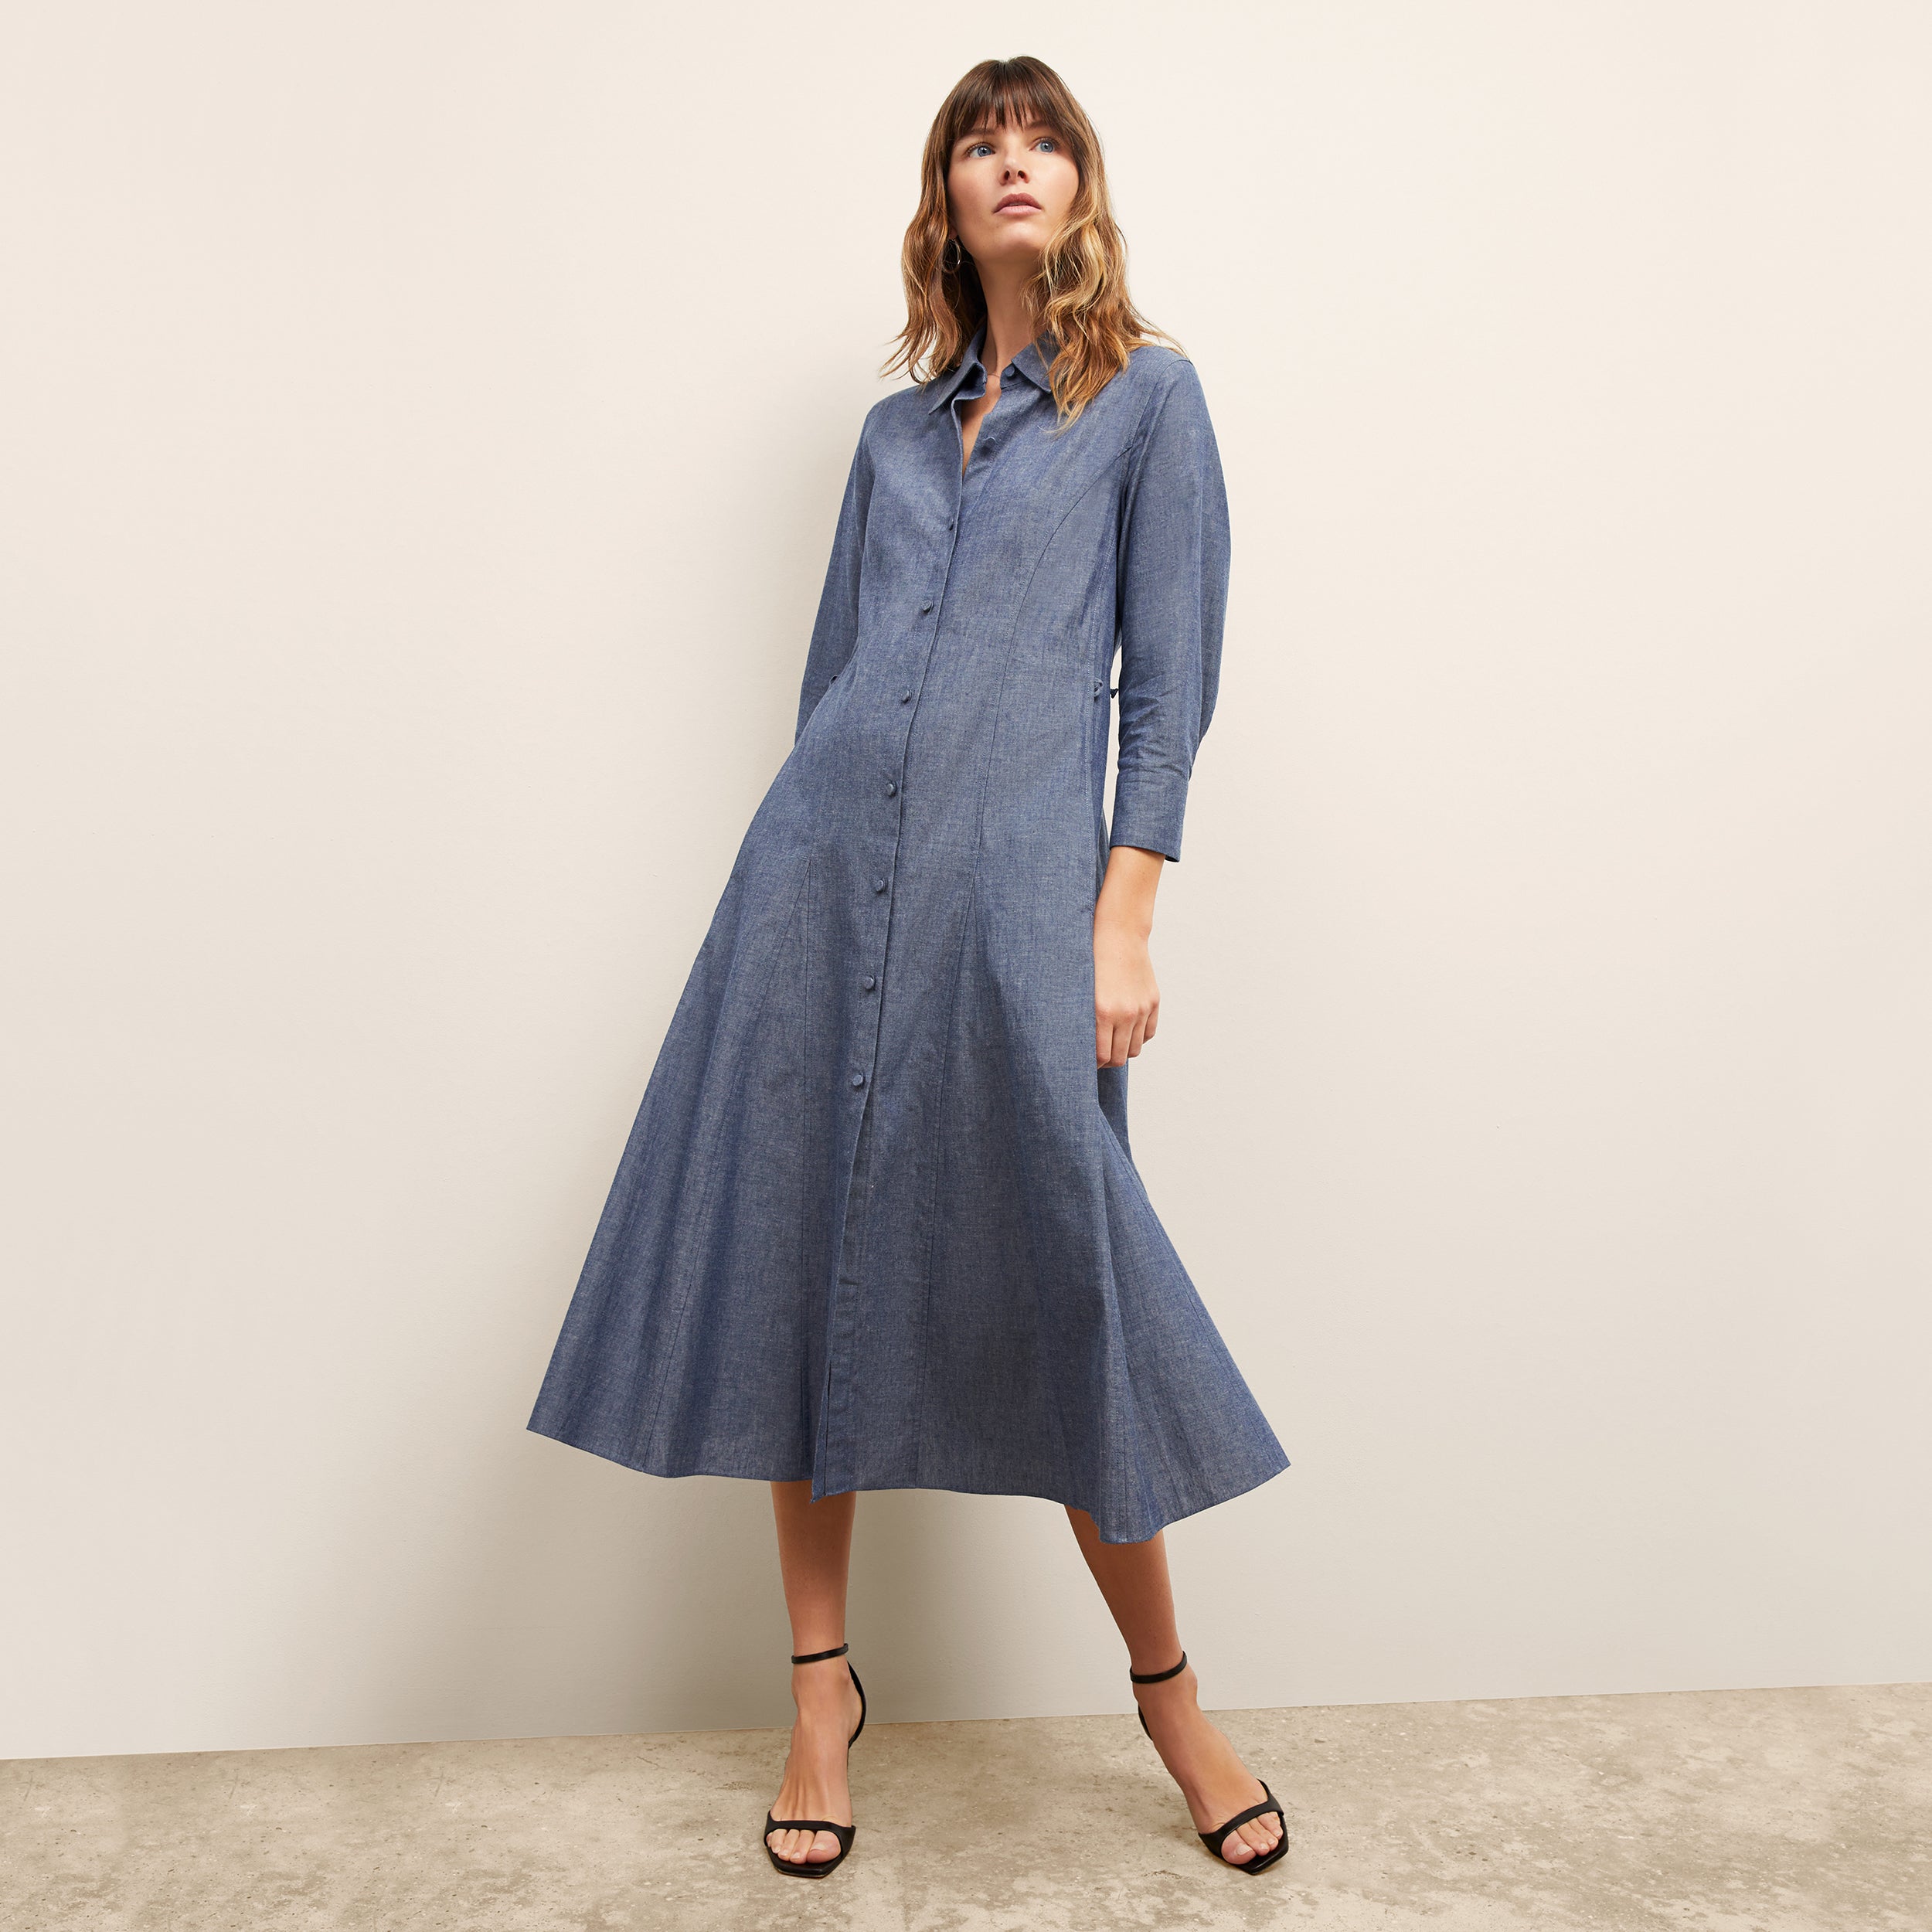 M.m.lafleur The Pepper Dress - Chambray In Blue